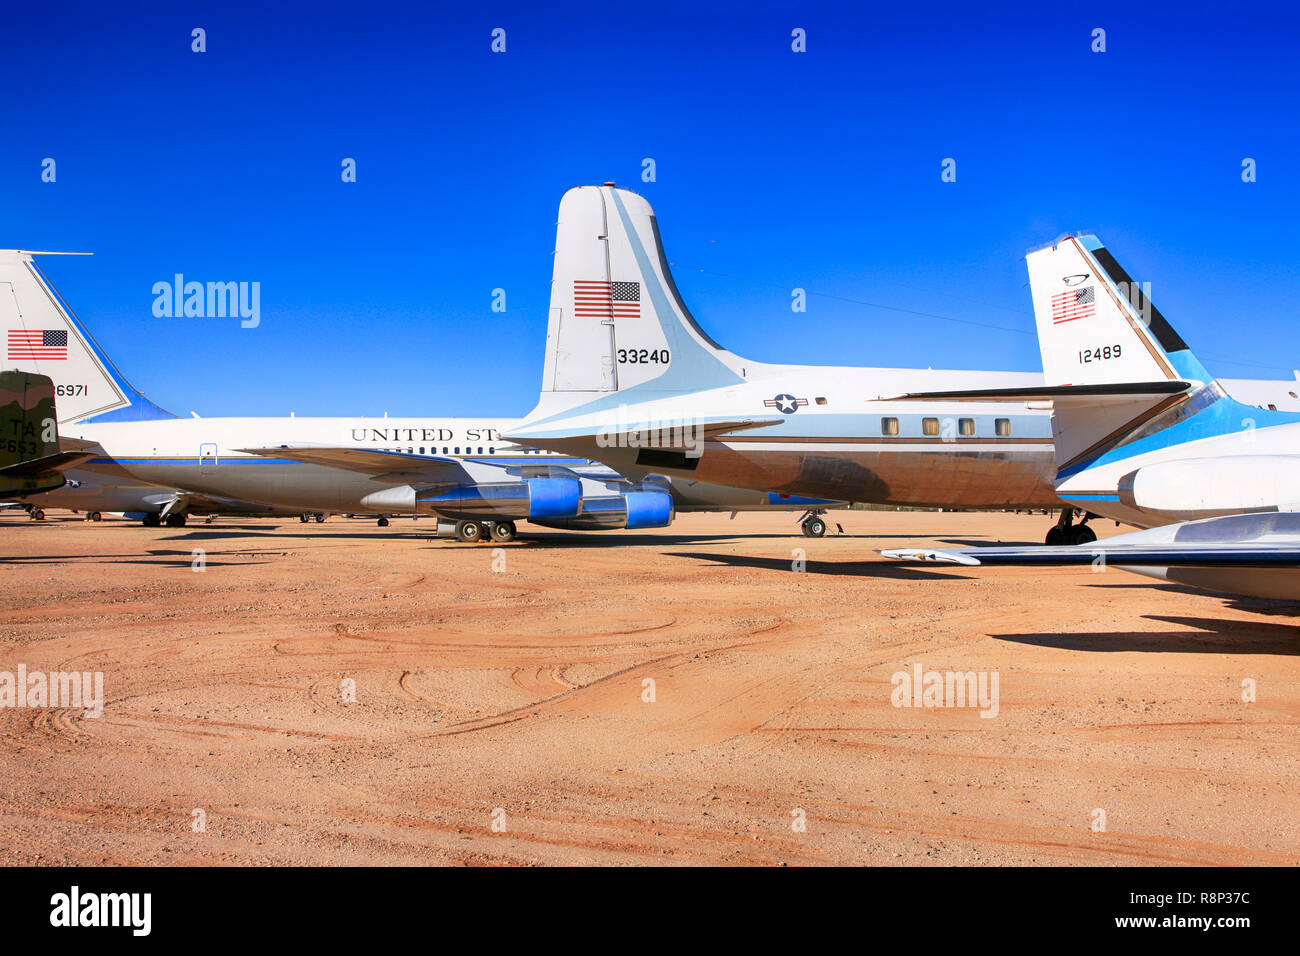 Aircraft rudders of Presidential Flight aircraft on display at the Pima Air & Space Museum in Tucson, AZ Stock Photo